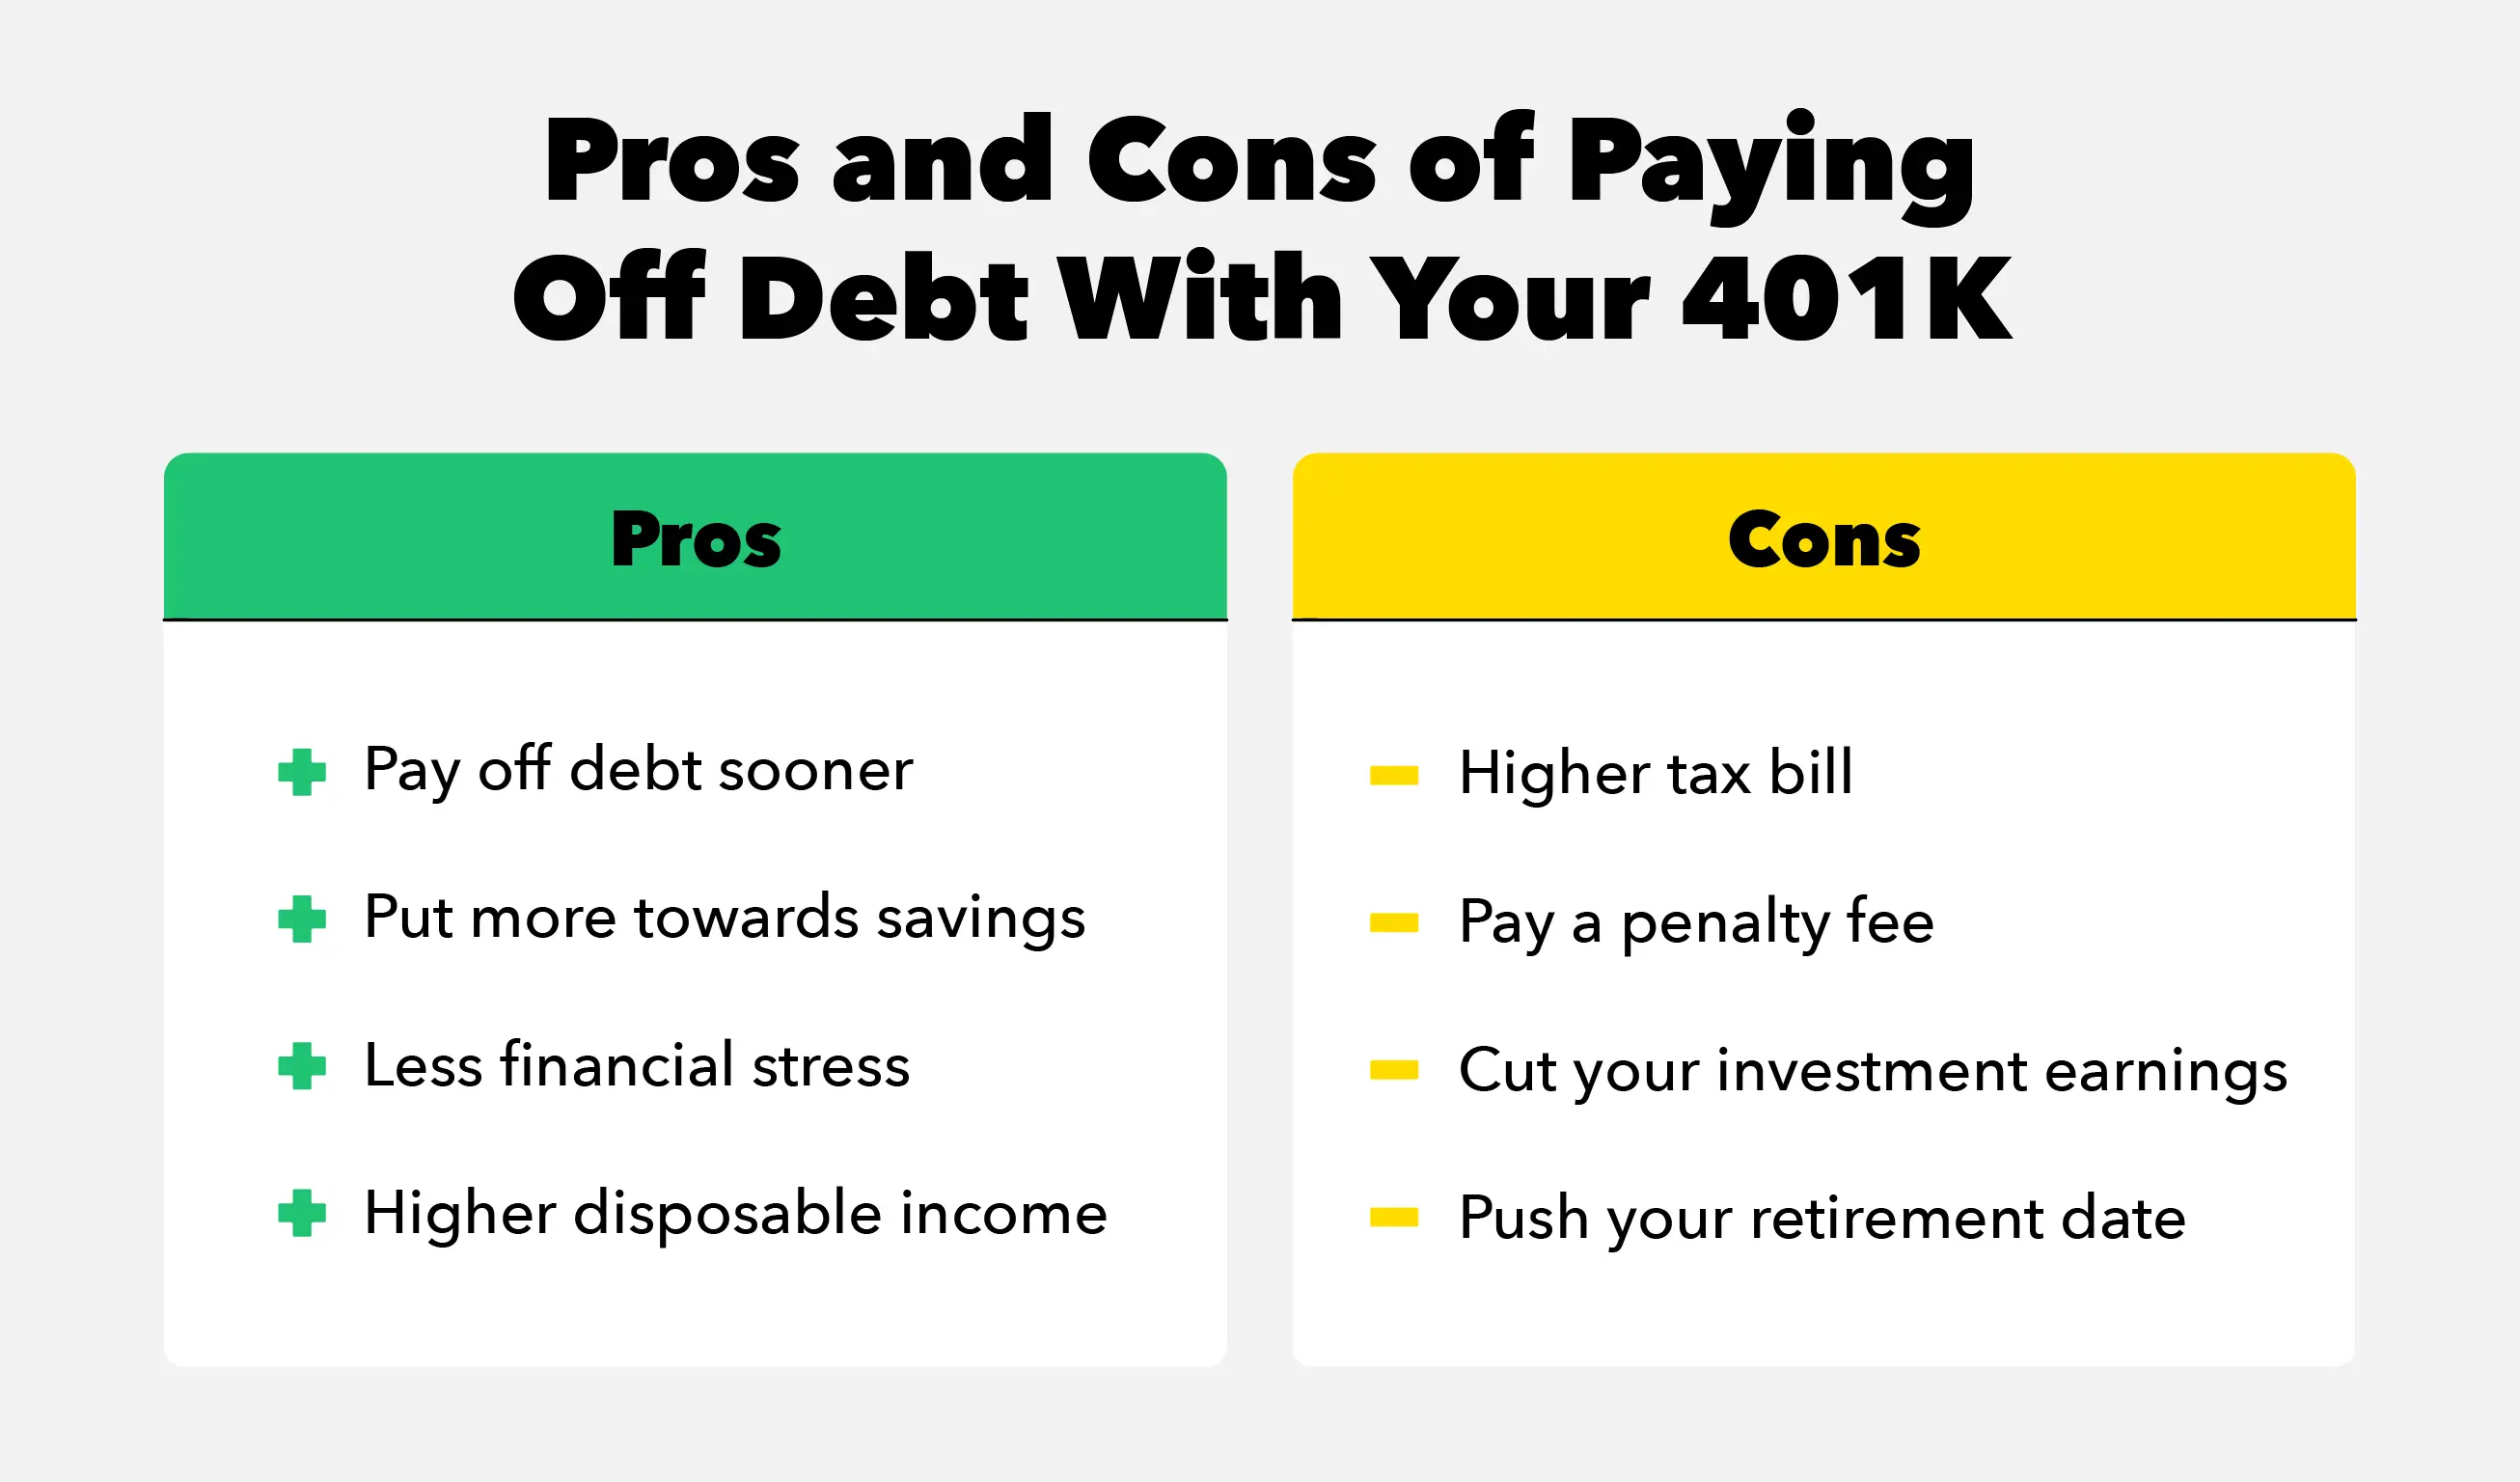 Should I Cash Out My 401k to Pay Off Debt?